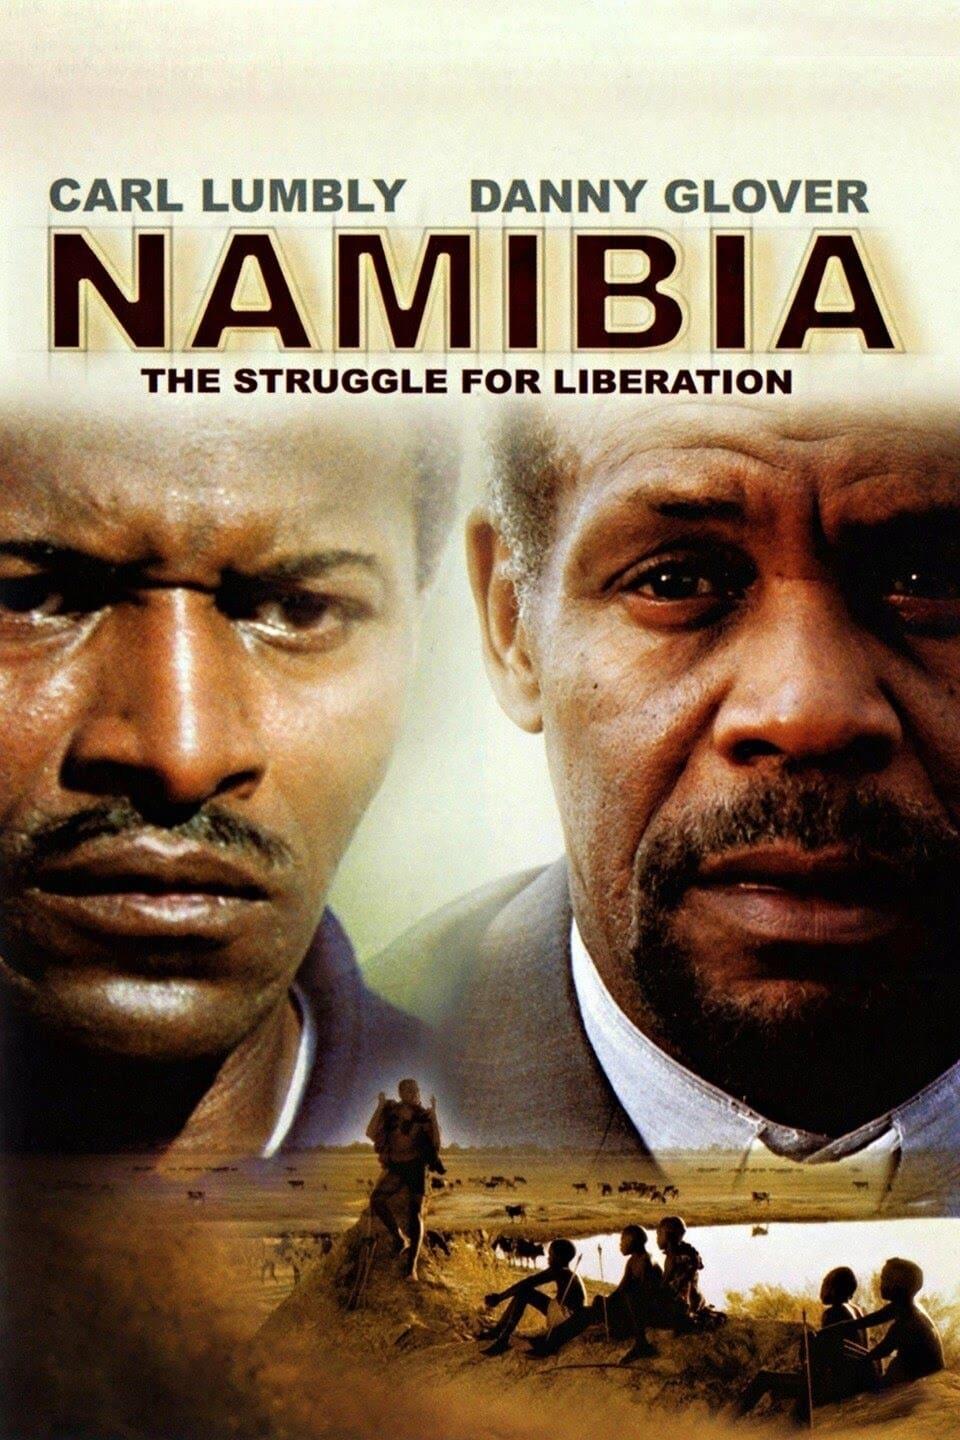 Namibia: The Struggle for Liberation poster